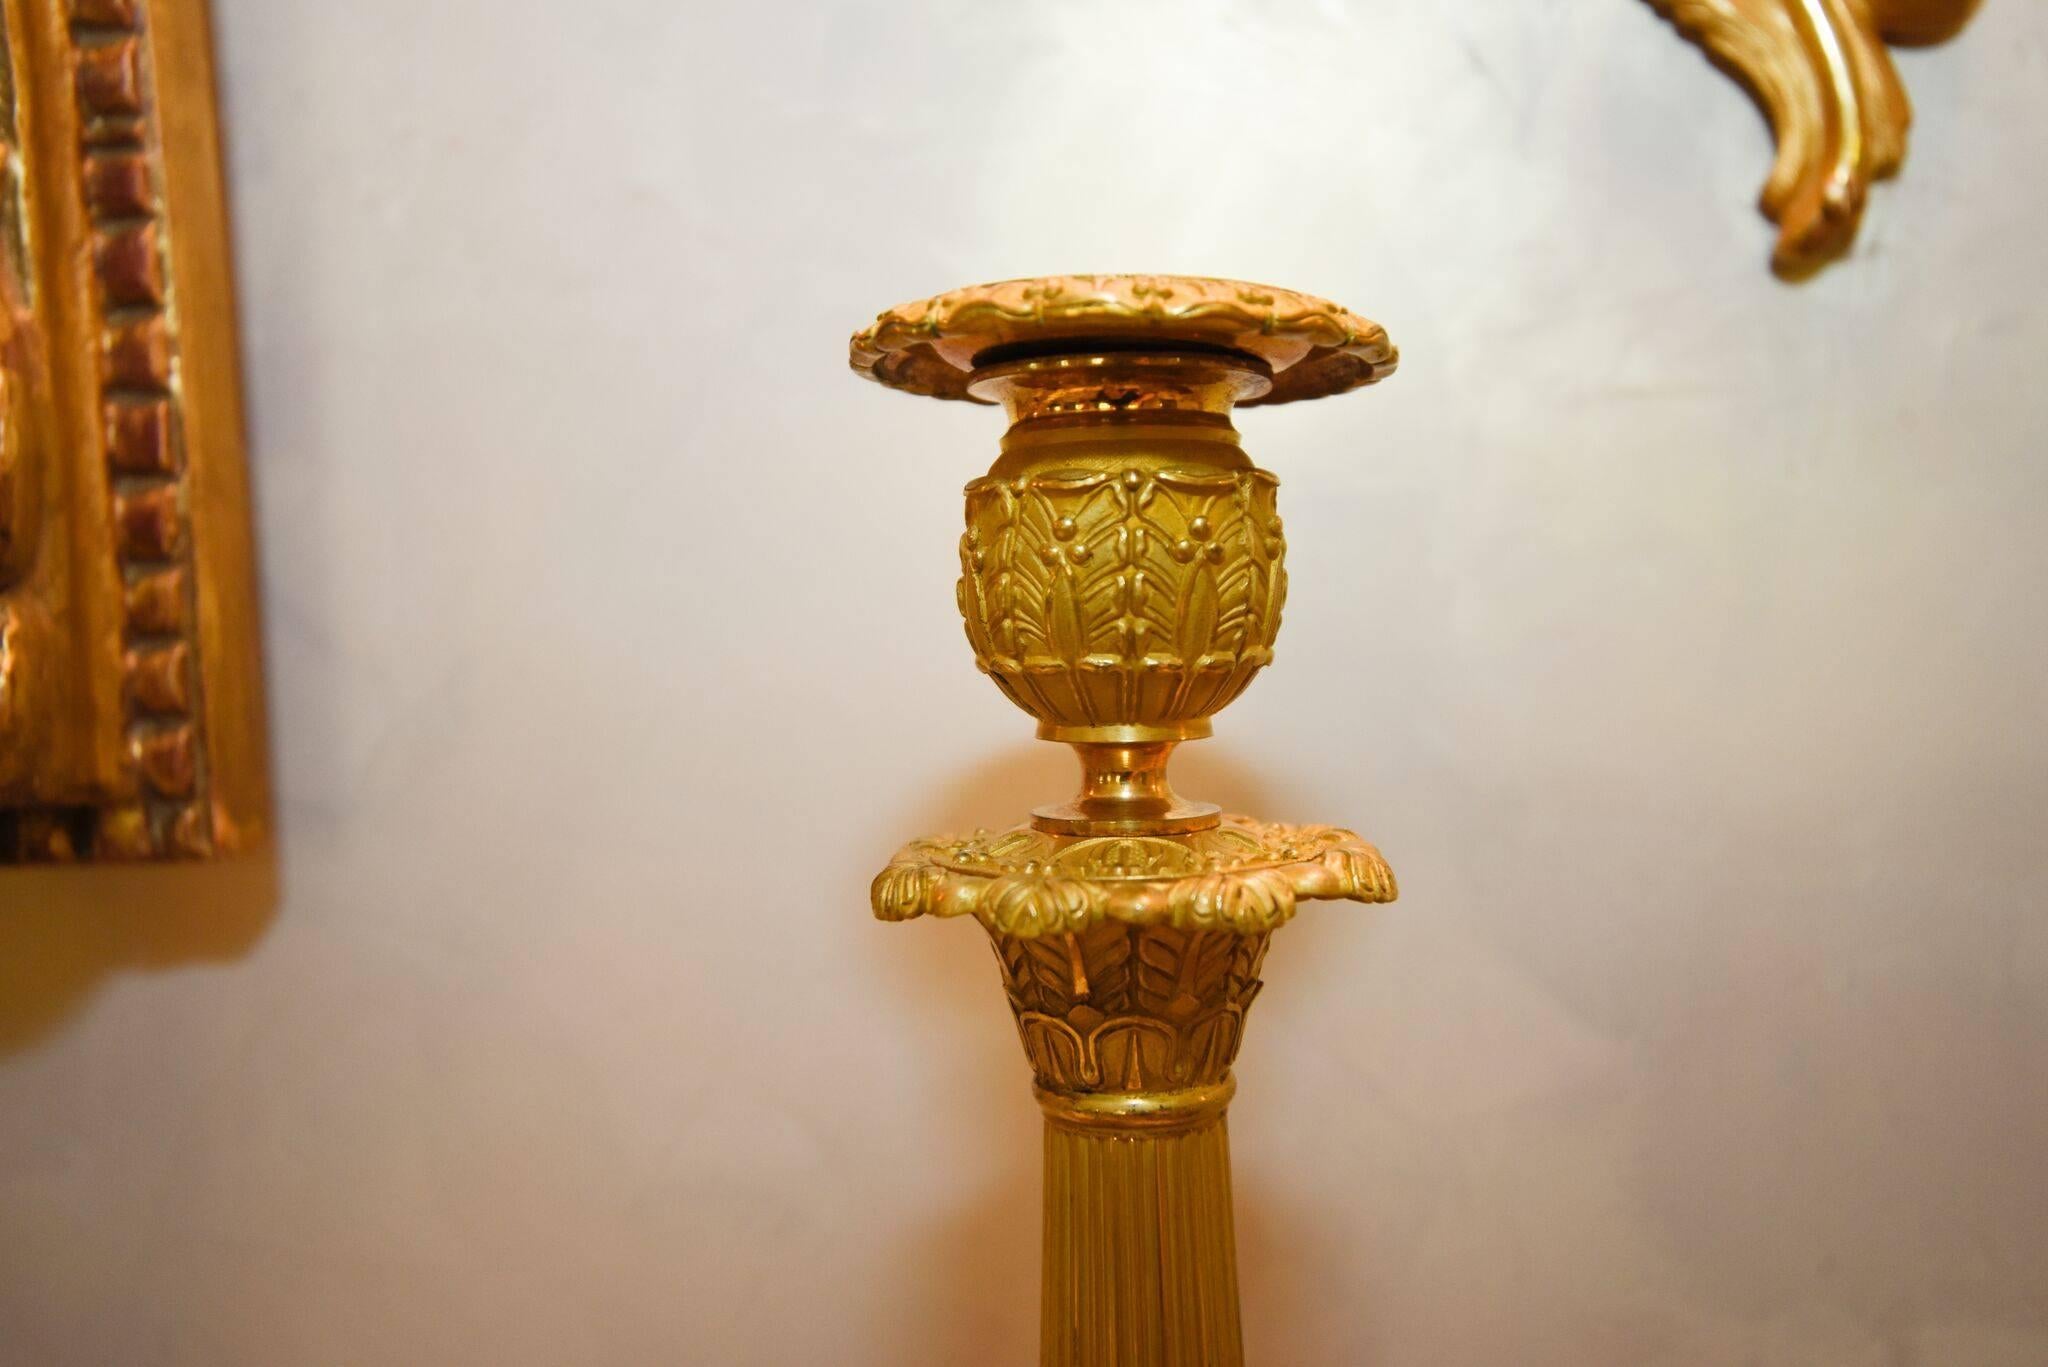 Pairing a neoclassical Silhouette with a gilt finish, 19th century French candlesticks. Top piece comes out to fit a thicker candlestick, circa 1880, Made in France.